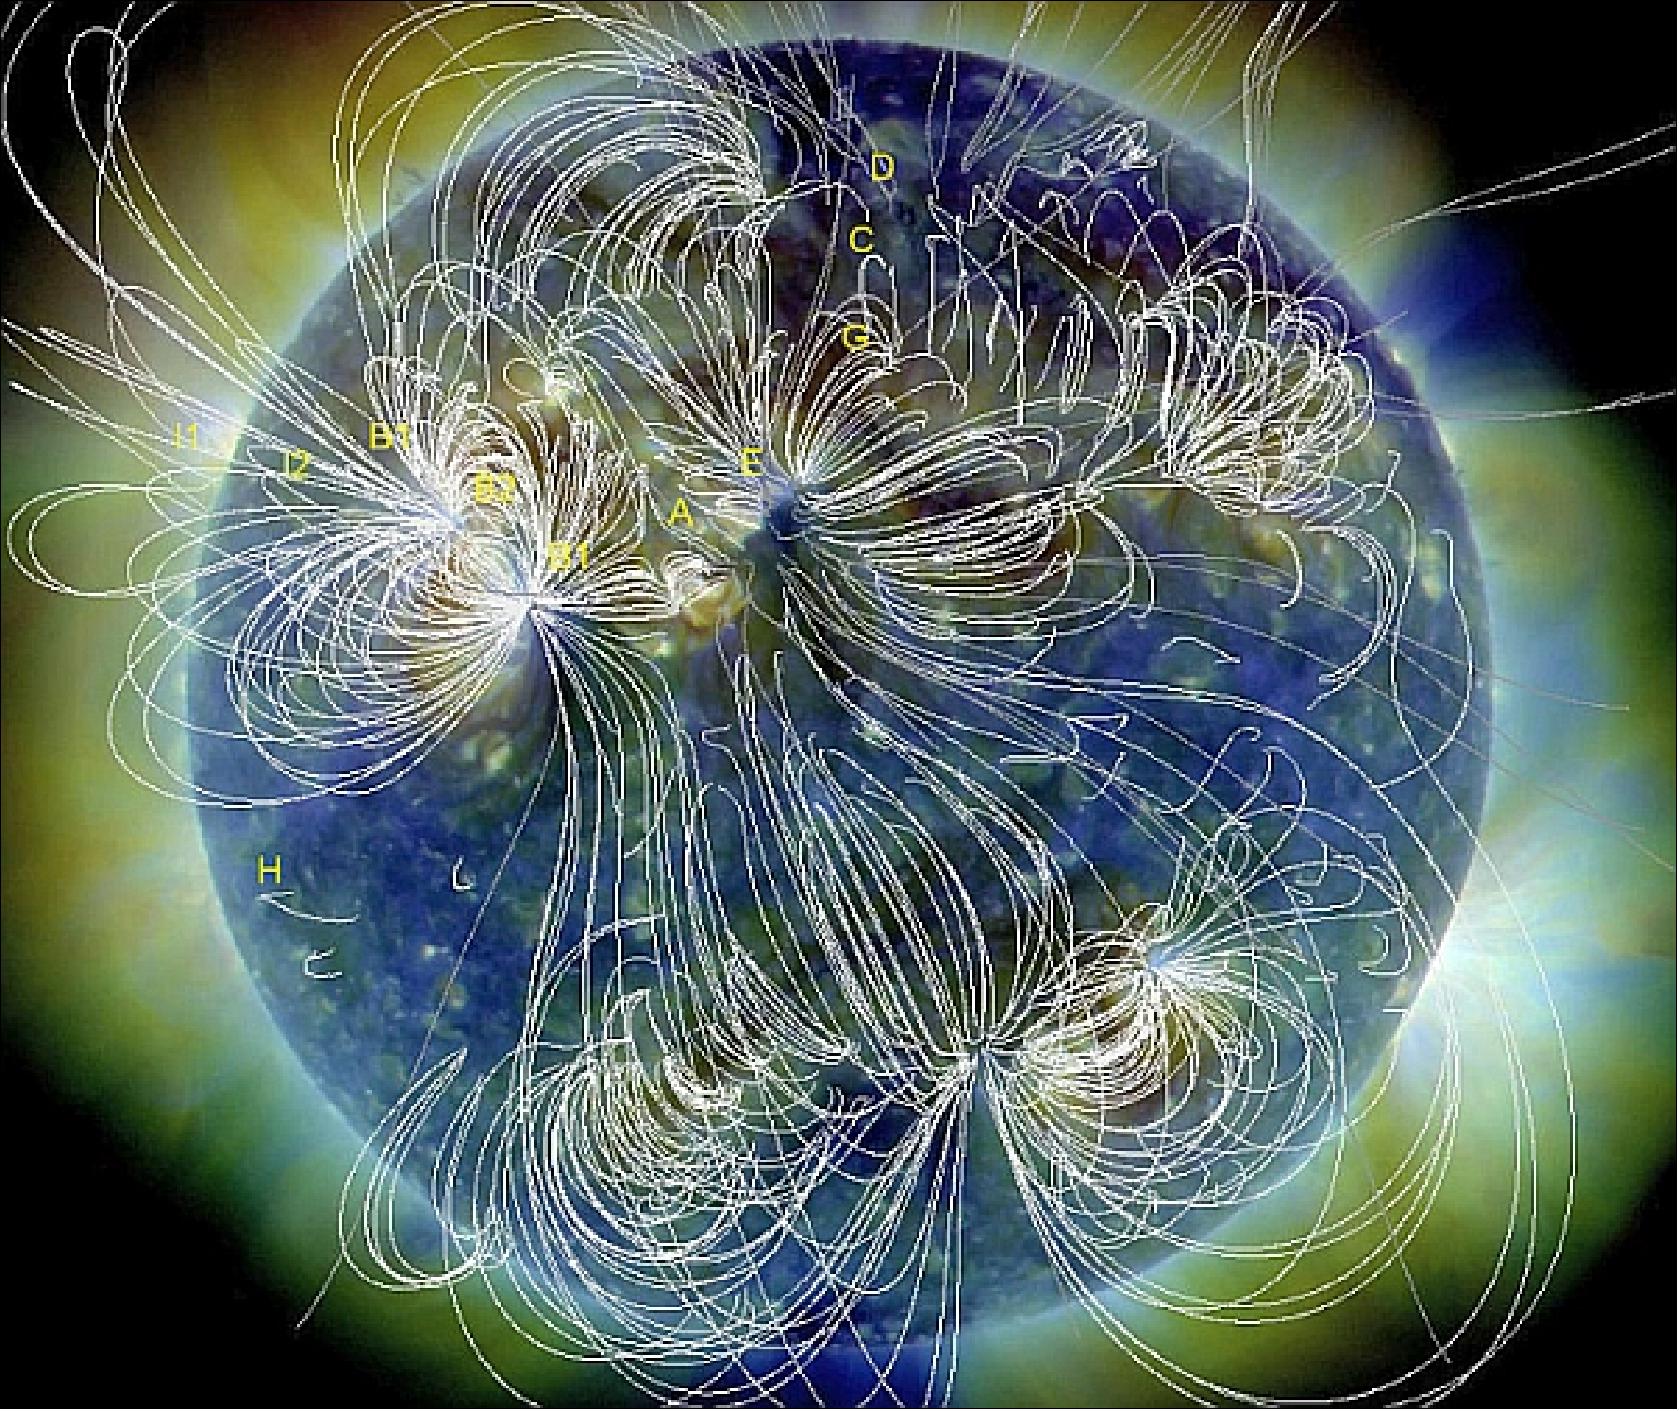 Figure 36: Locations of key events are labeled in this extreme ultraviolet image of the sun, obtained by the Solar Dynamics Observatory during the Great Eruption of Aug. 1, 2010. White lines trace the sun's magnetic field (image credit: Karel Schrijver and Alan Title of LMSAL)